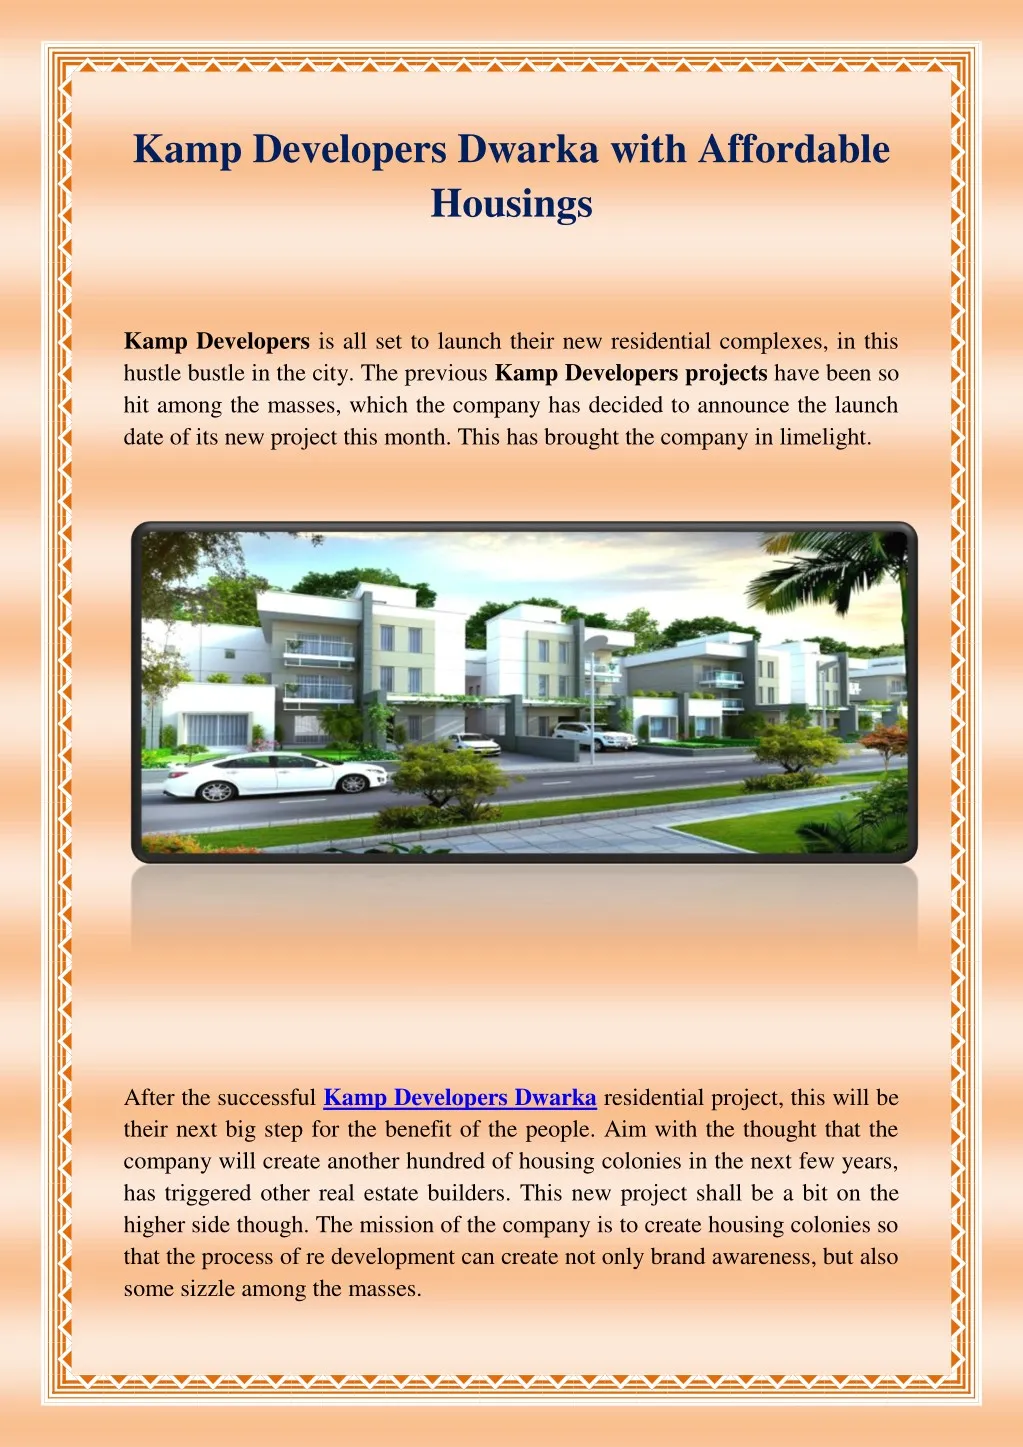 kamp developers dwarka with affordable housings